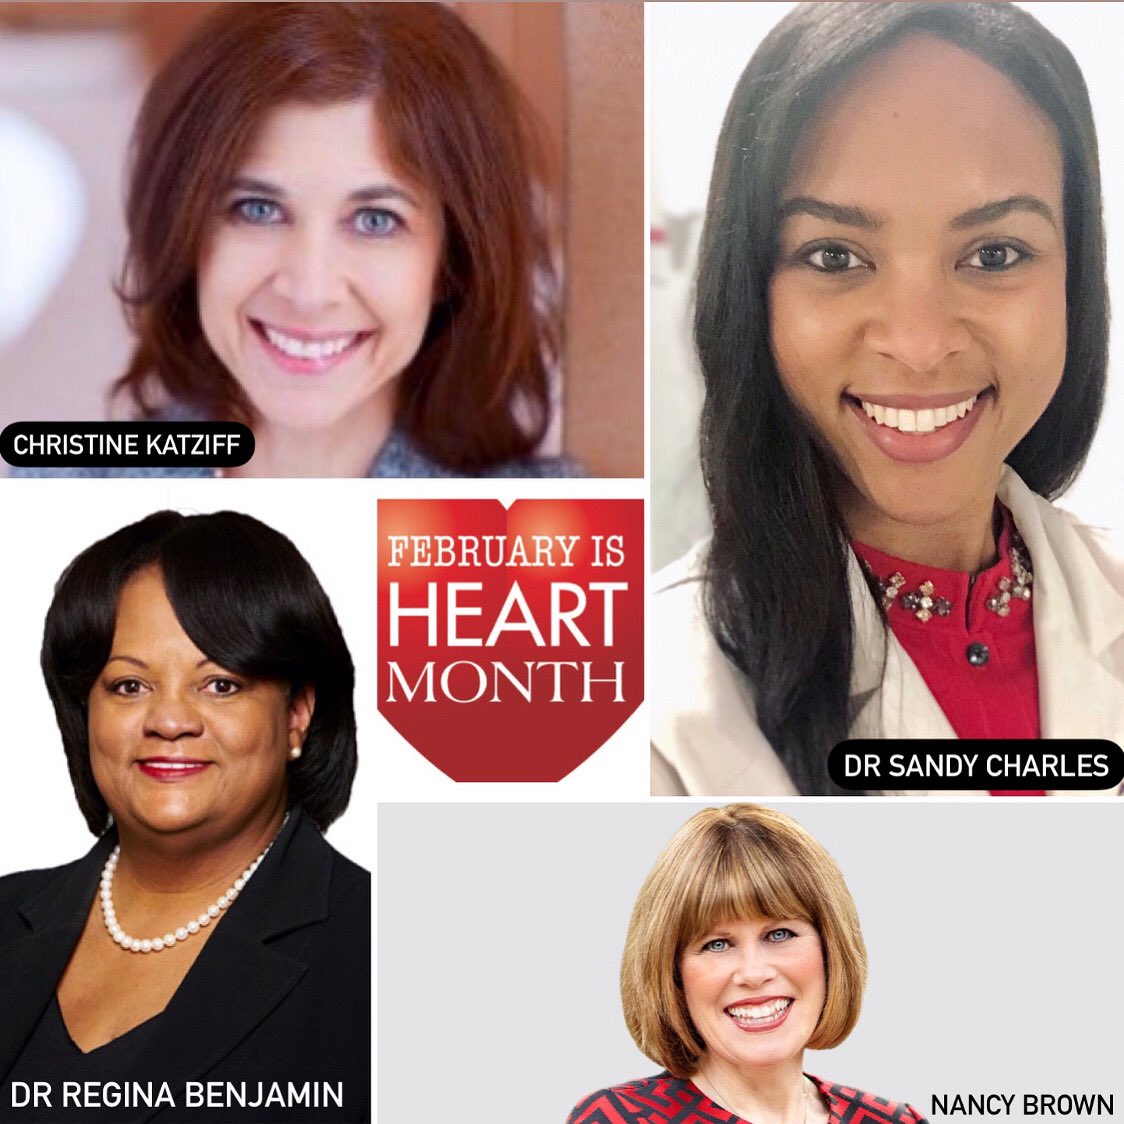 Thank you former Surgeon General @reginabenjamin, CEO of the American Heart Association @NancyatHeart, and Chief Audit Executive for Bank of America @CKatziff for our insightful panel discussion about heart health, disparities in medicine, and the impact of COVID-19! #awareness